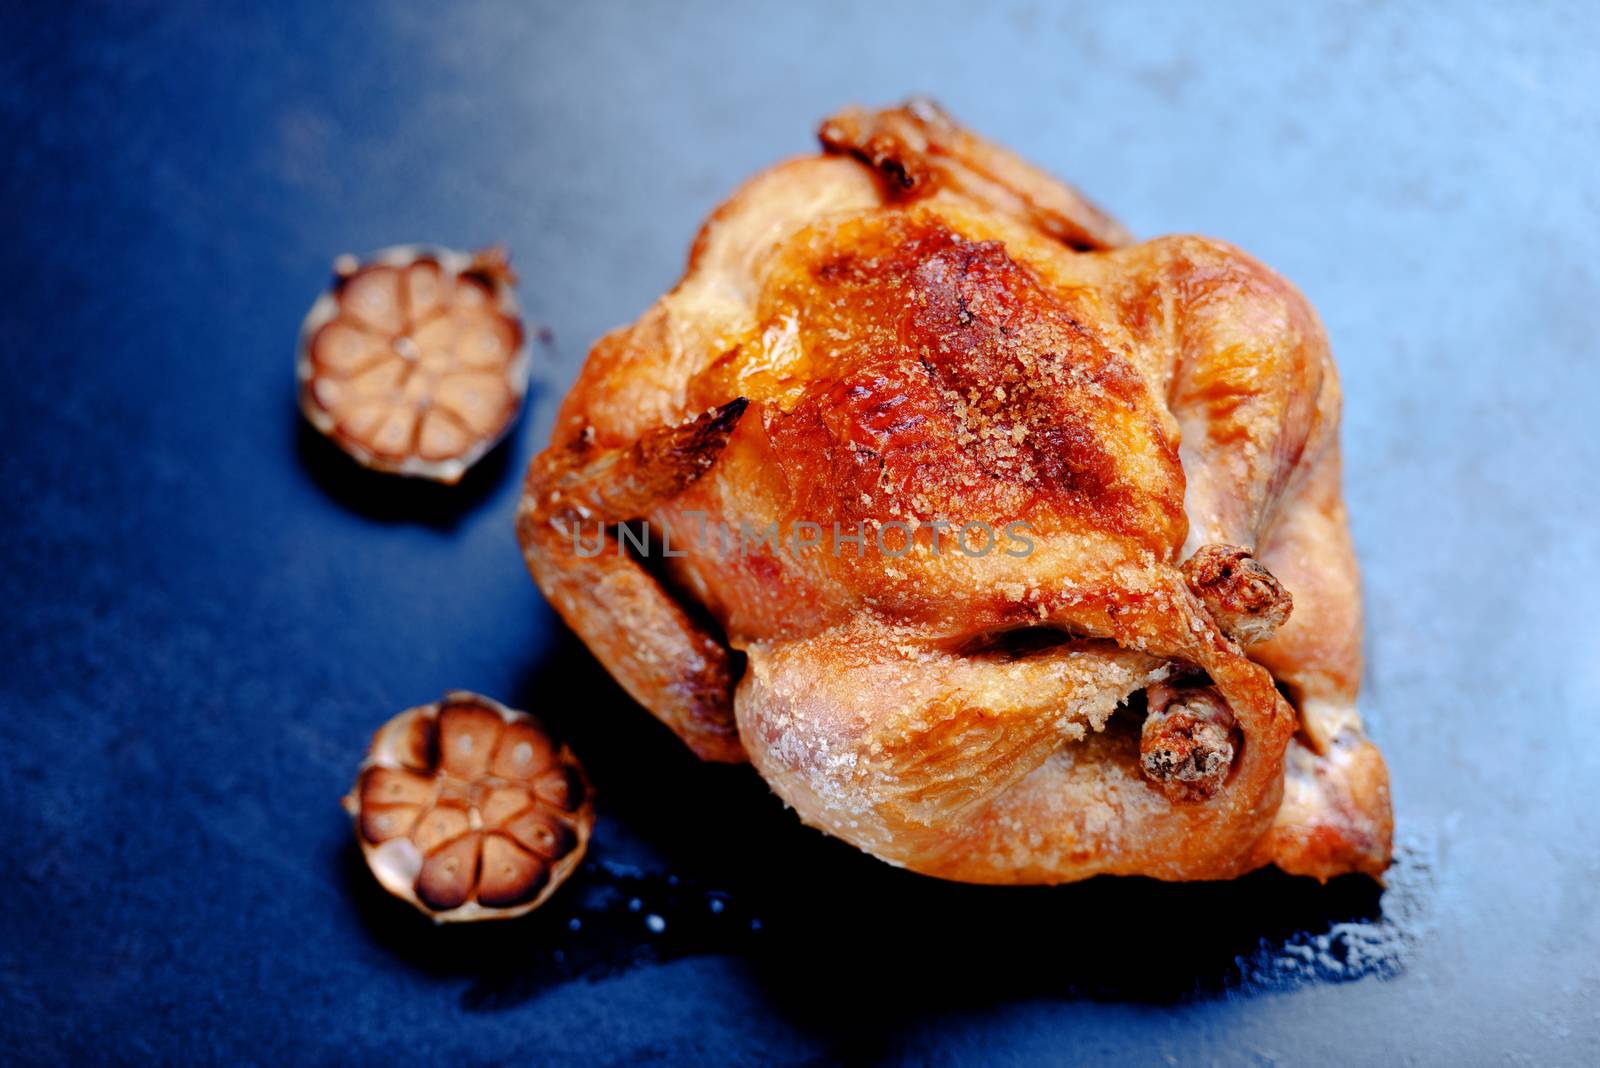 Whole oven roasted chicken with garlic by Nanisimova